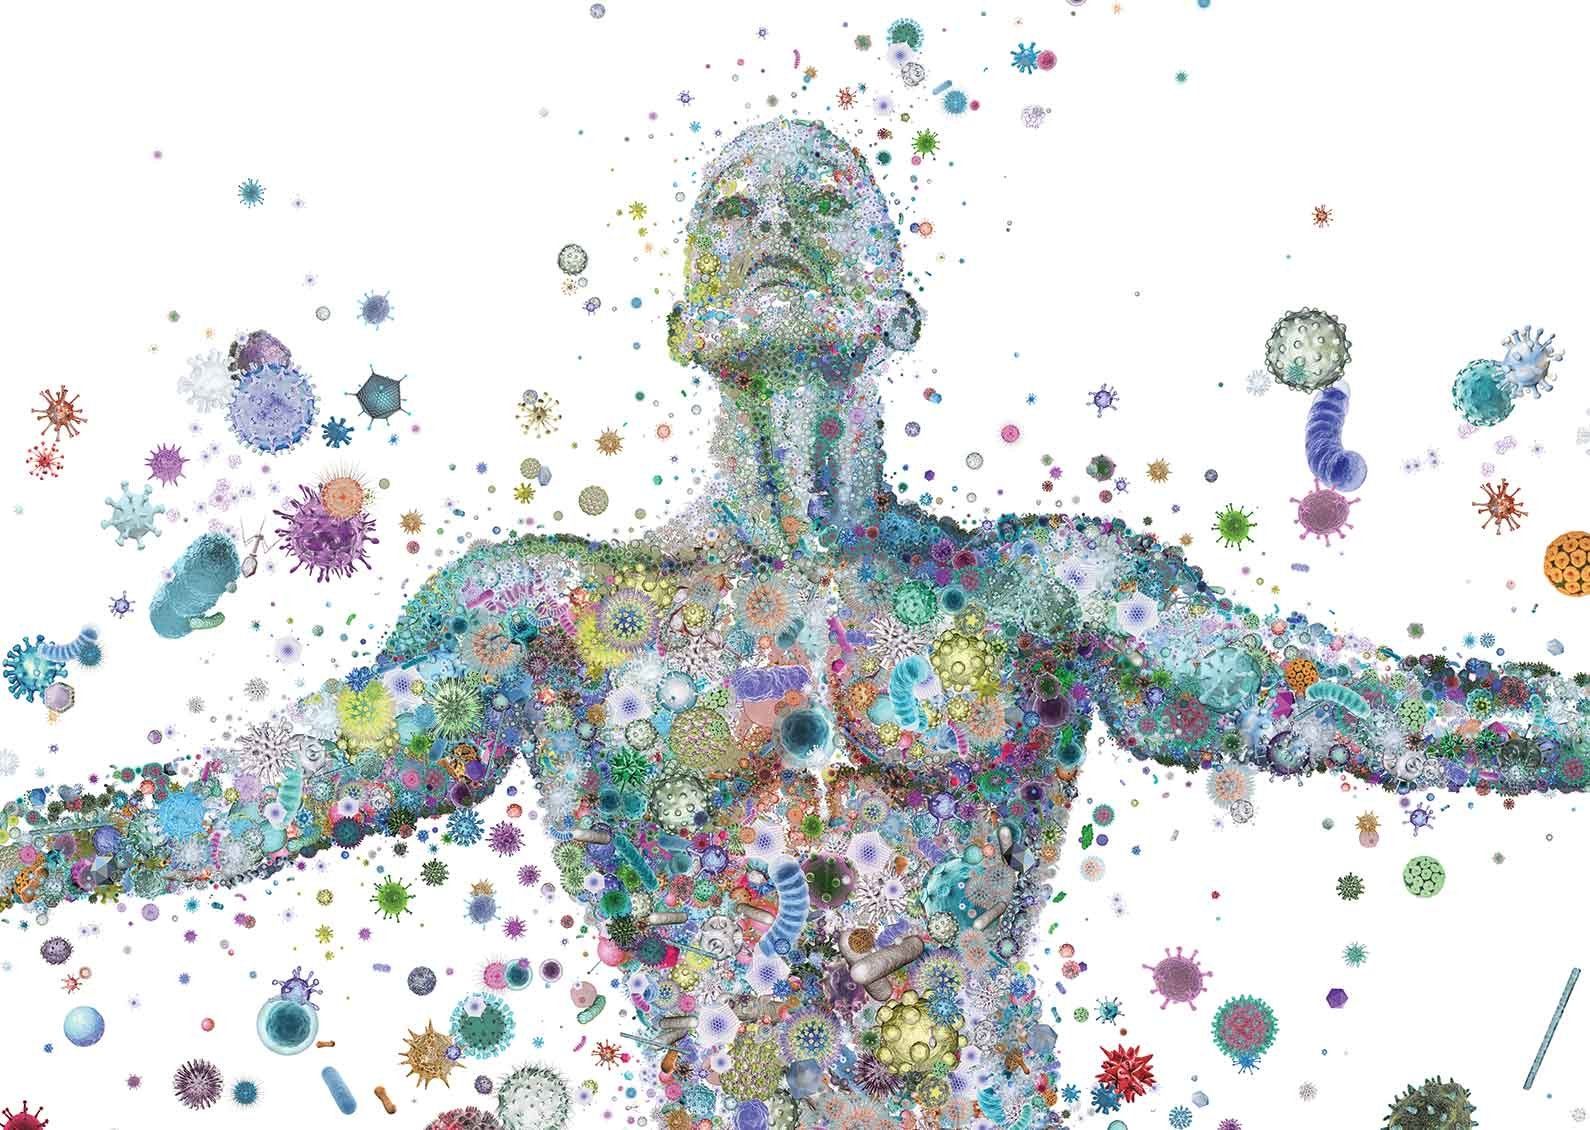 Illustration of a human made out of microbiome bacterial cells with bacteria floating all around them.